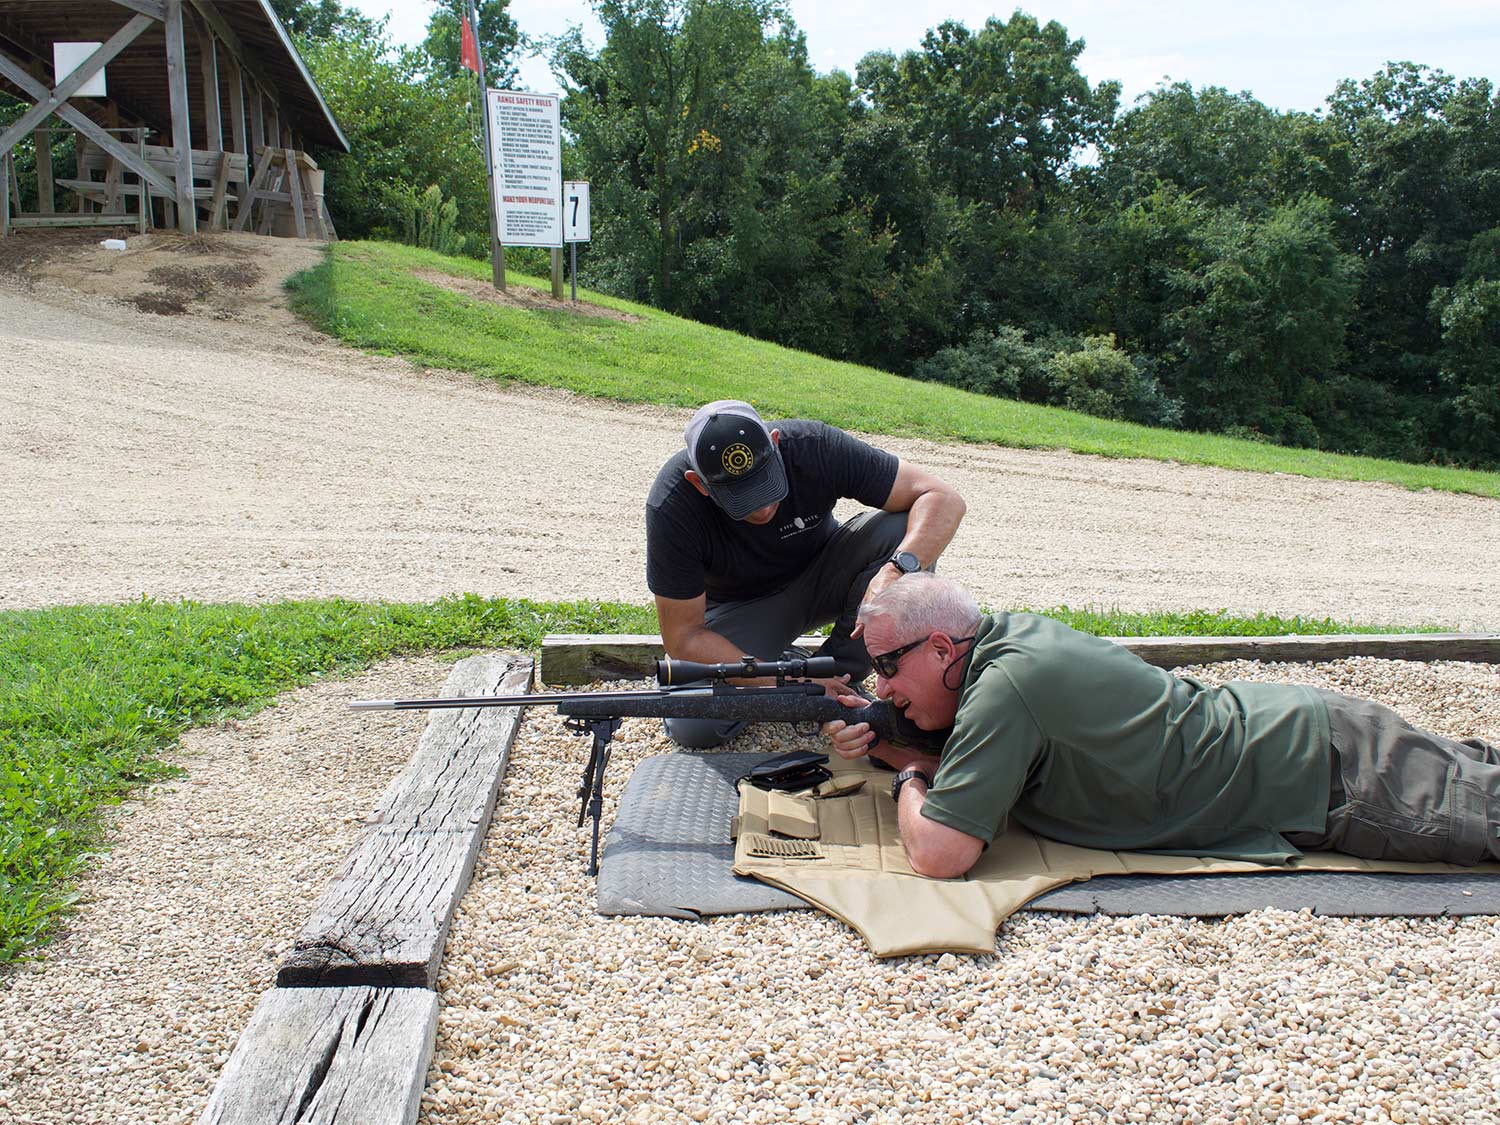 Two men checking scopes on a rifle.